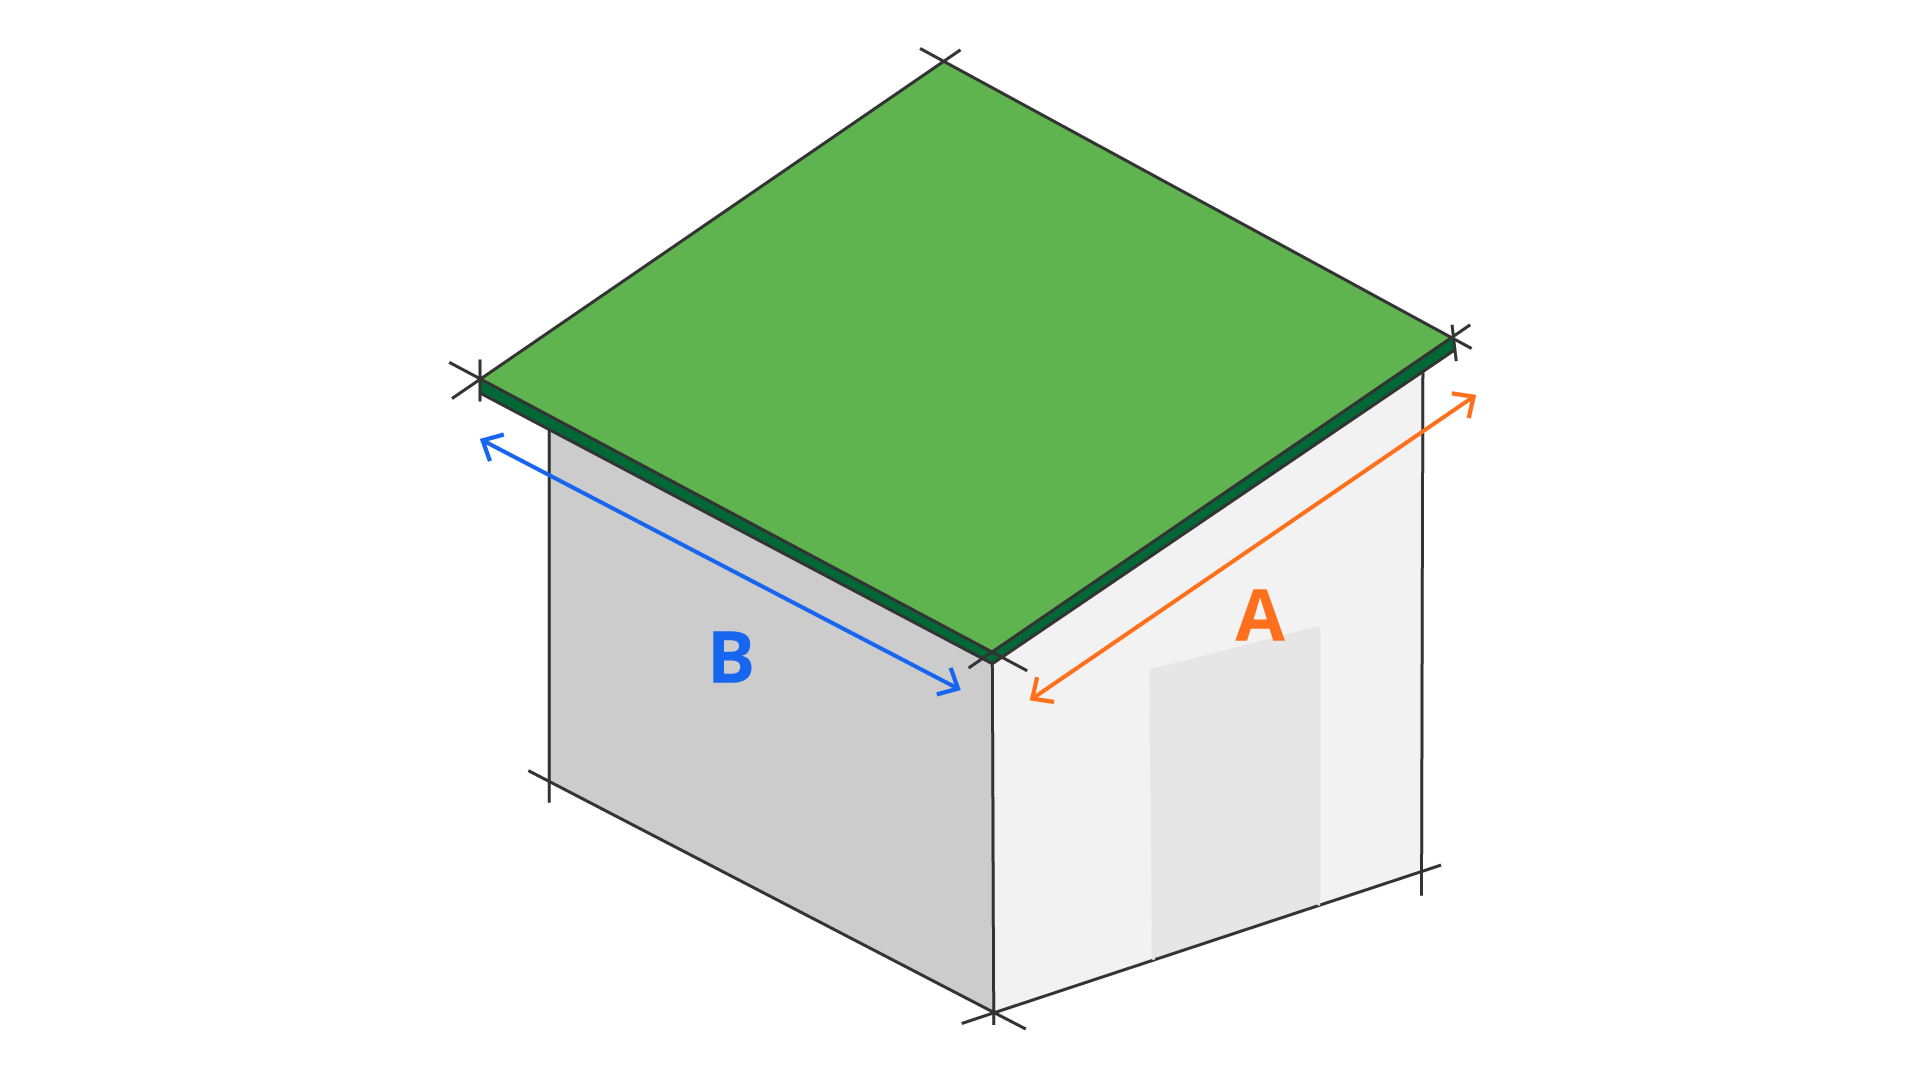 Single Slope Roof Diagram with coordinates